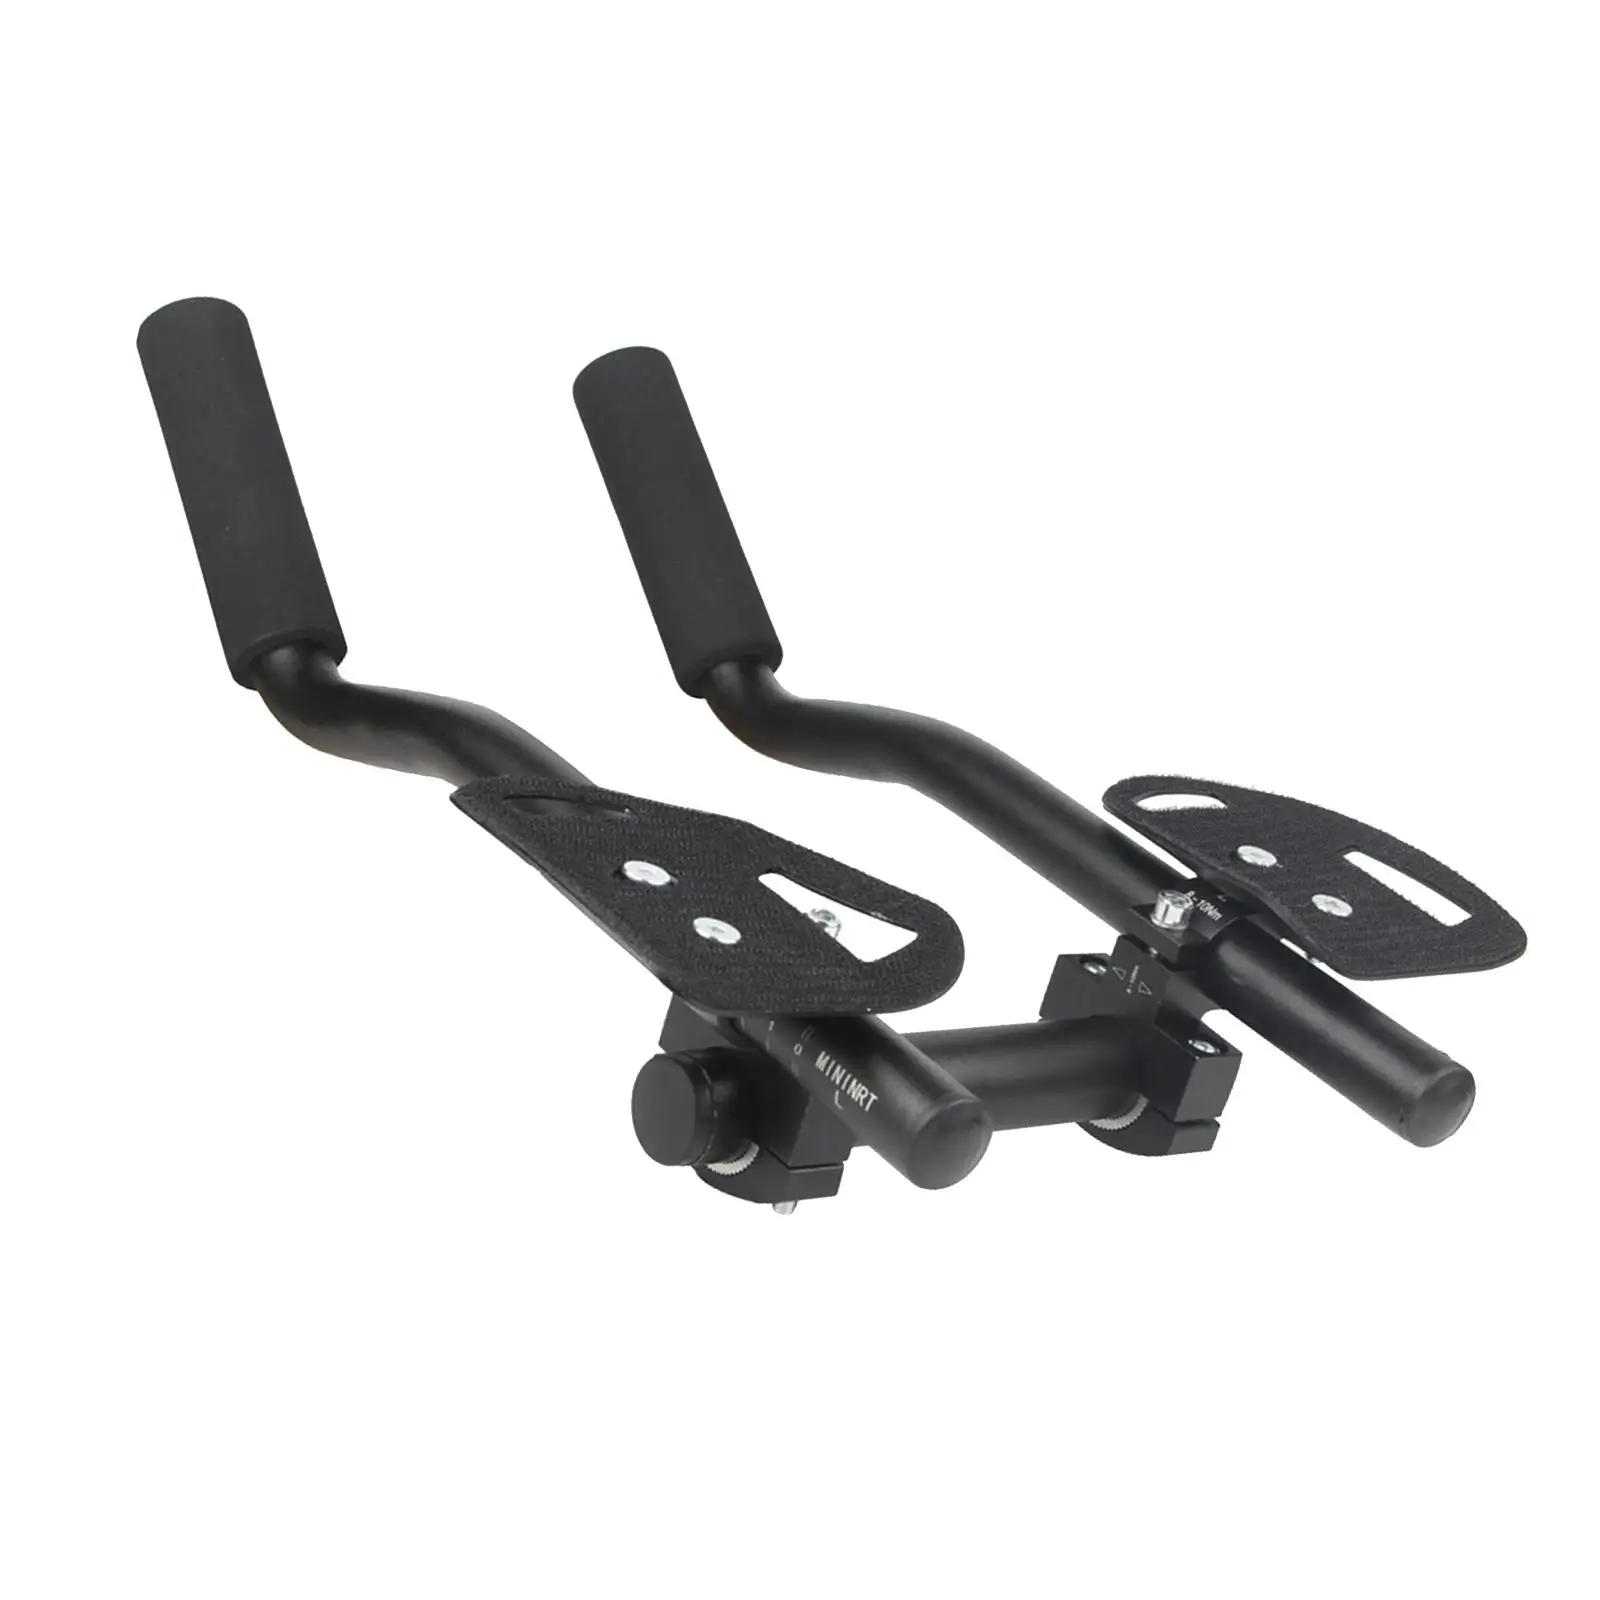 Bike Arms Relaxation Clip on Bicycle Arm Rest Tt Bar for BMX Racing Bikes Time Trial Road Bikes Folding Bikes